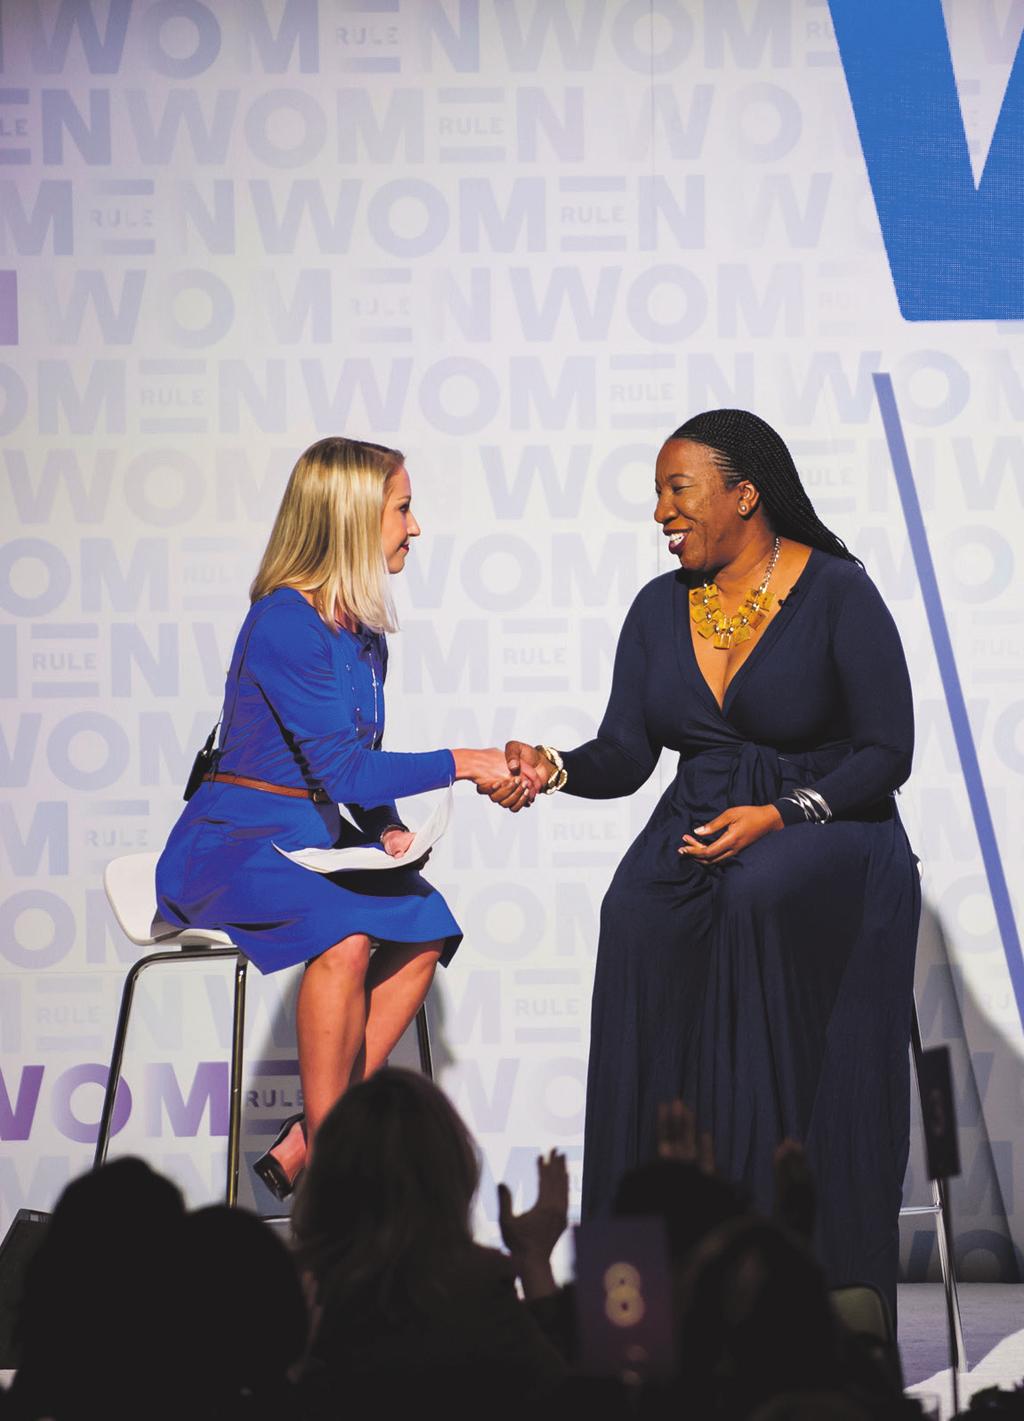 the challenges ahead Connect: Join the Women Rule community from across sectors, and meet the women shaping the world from behind the scenes at the center of the political, business and intellectual